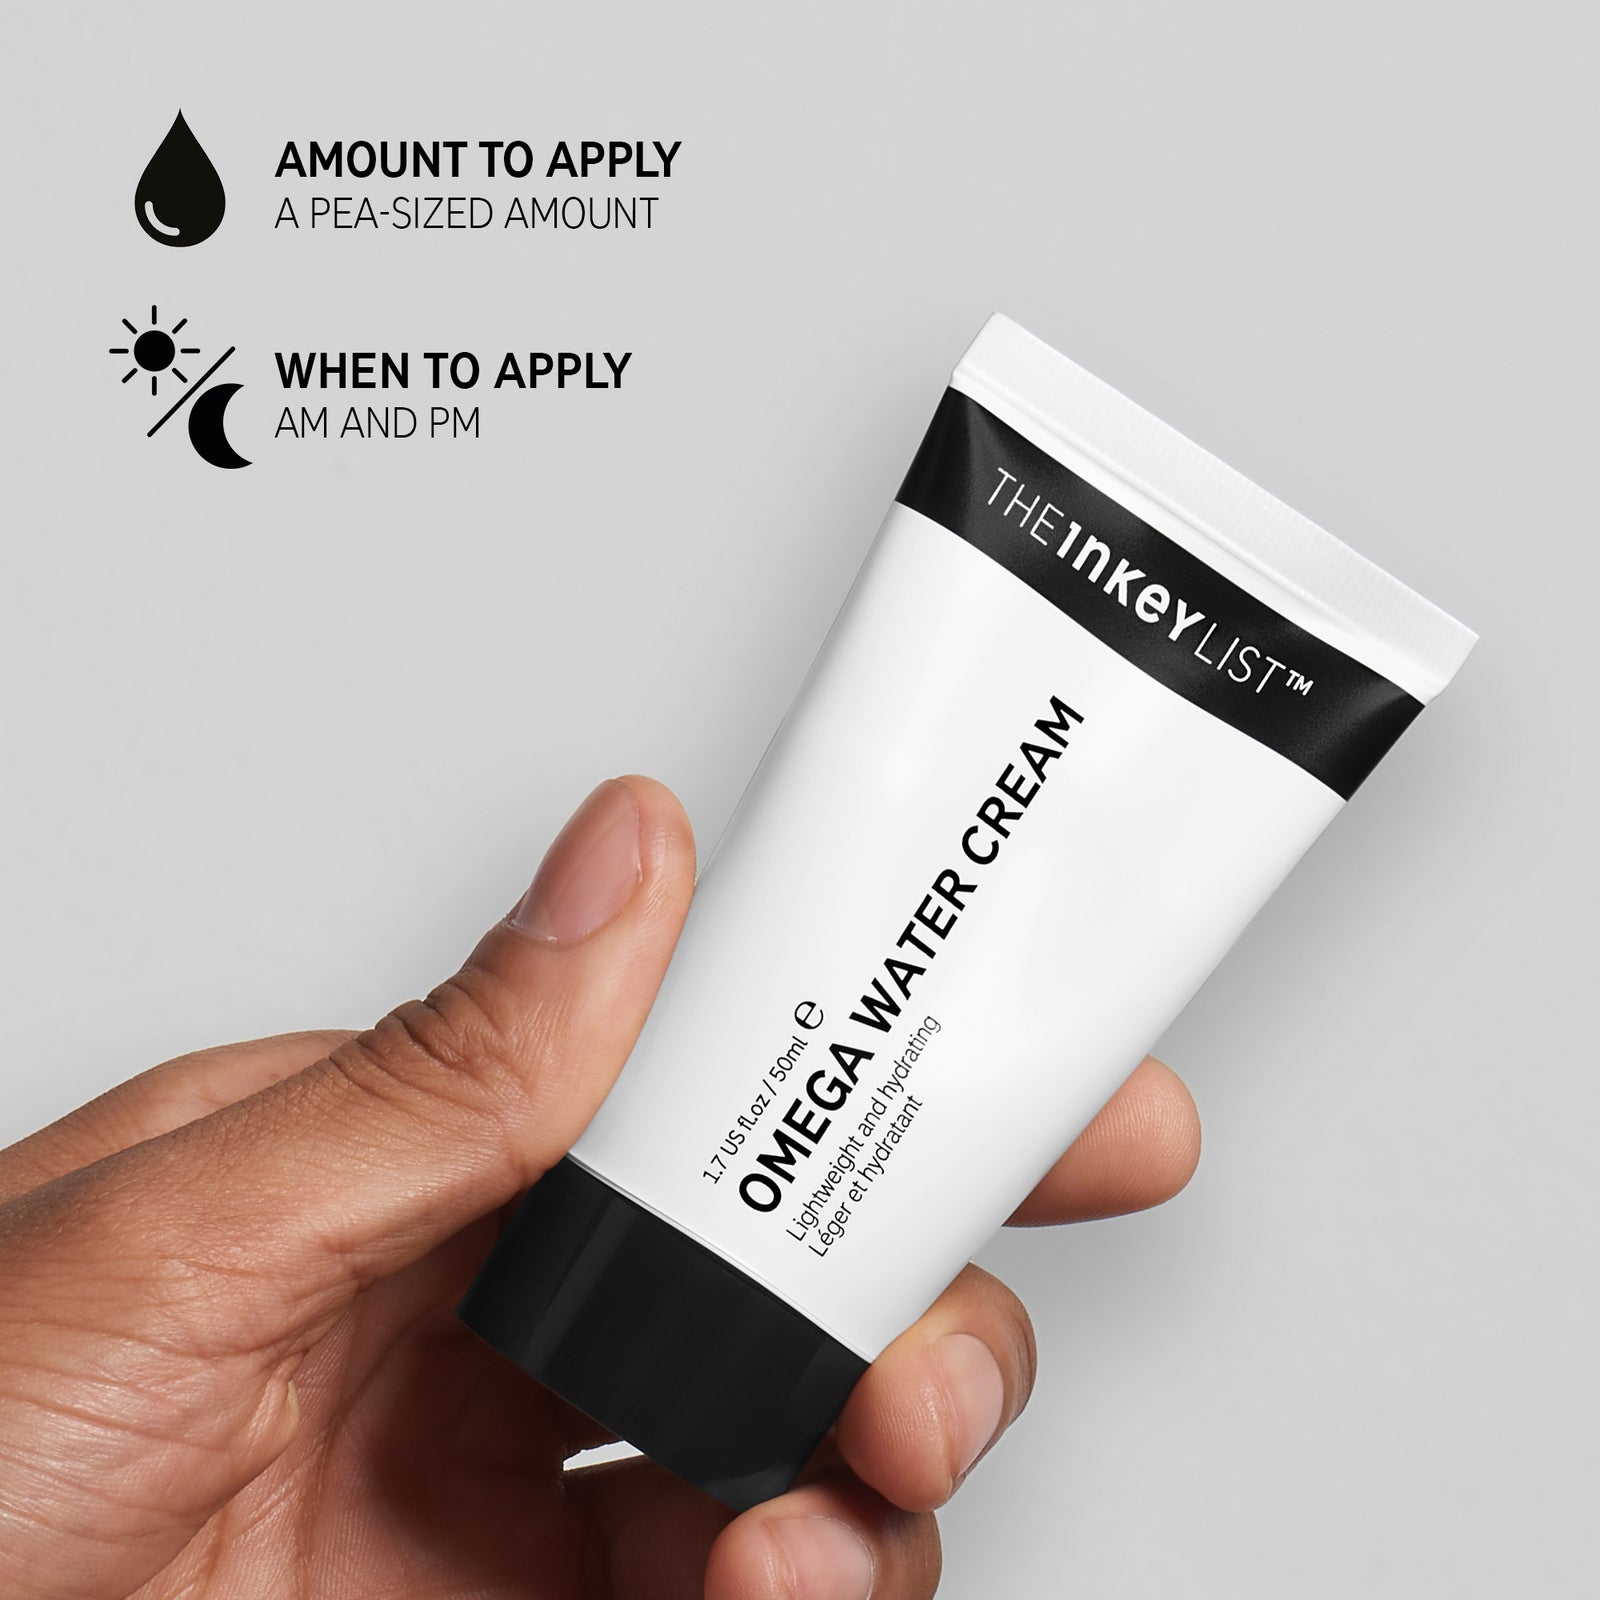 Hand holding Omega Water Cream with black text explaining how and when to use it